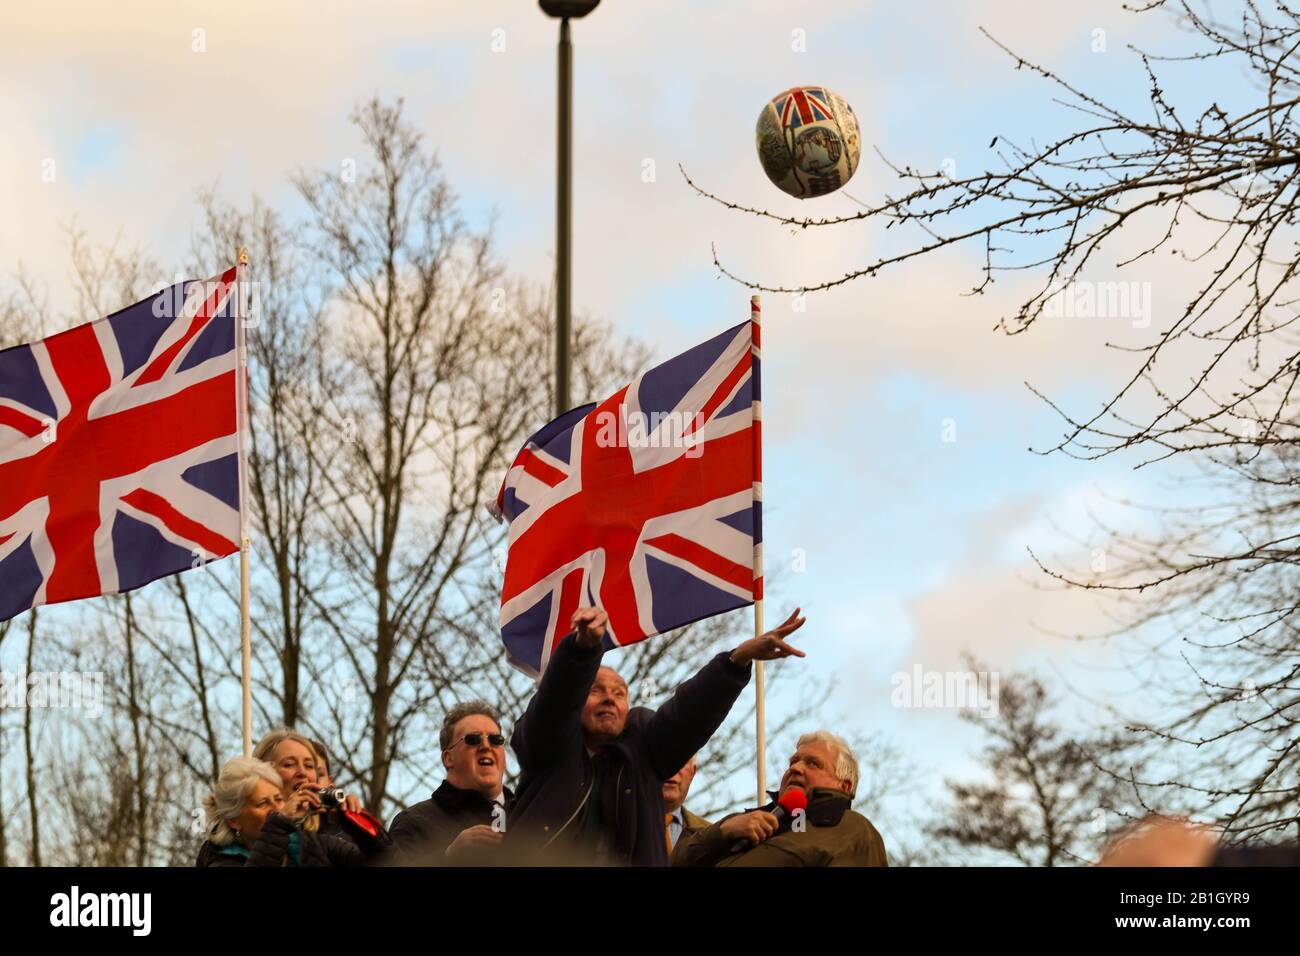 Ashbourne, UK. 25th Feb, 2020. Andrew Lemon 'turns up' the ball from the plinth at Shaw Croft car park. The first day of the two day Shrovetide Football Game in the market town of Ashbourne, Derbyshire. The game is played with two teams, the Up'Ards and the Down'Ards. There are two goal posts 3 miles (4.8 km) apart, one at Sturston Mill (where the Up'Ards attempt to score), other at Clifton Mill (where the Down'Ards score). Penelope Barritt/Alamy Live News Stock Photo